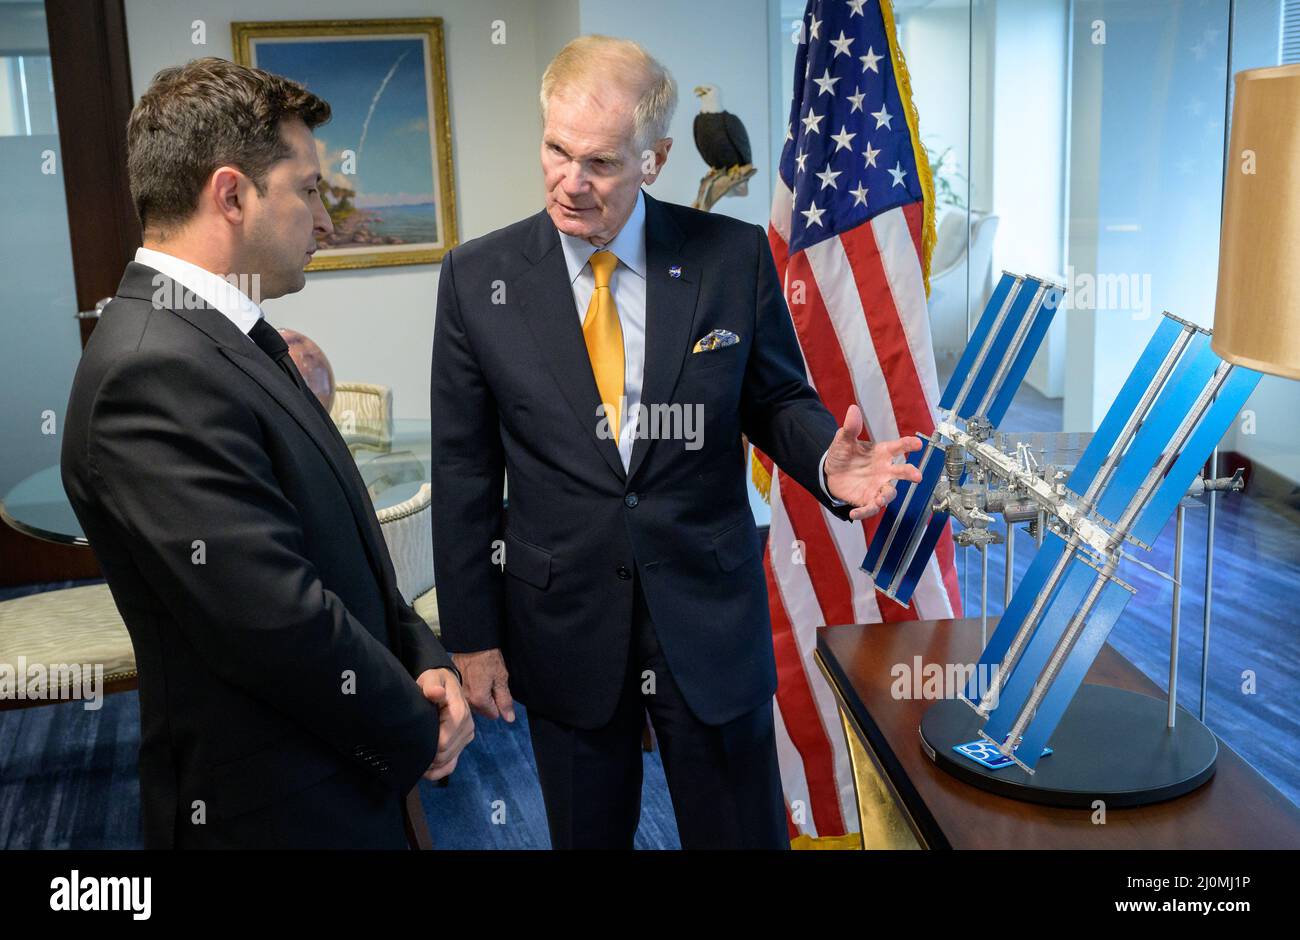 Washington, District of Columbia, USA. 31st Aug, 2021. In this photo, NASA Administrator BILL NELSON, right, discusses the International Space Station with Ukrainian President VOLODYMYR ZELENSKYY during a meeting, Tuesday, Aug. 31, 2021, at the NASA Headquarters Mary W. Jackson Building in Washington. Credit: Bill Ingalls/NASA/ZUMA Press Wire Service/ZUMAPRESS.com/Alamy Live News Stock Photo